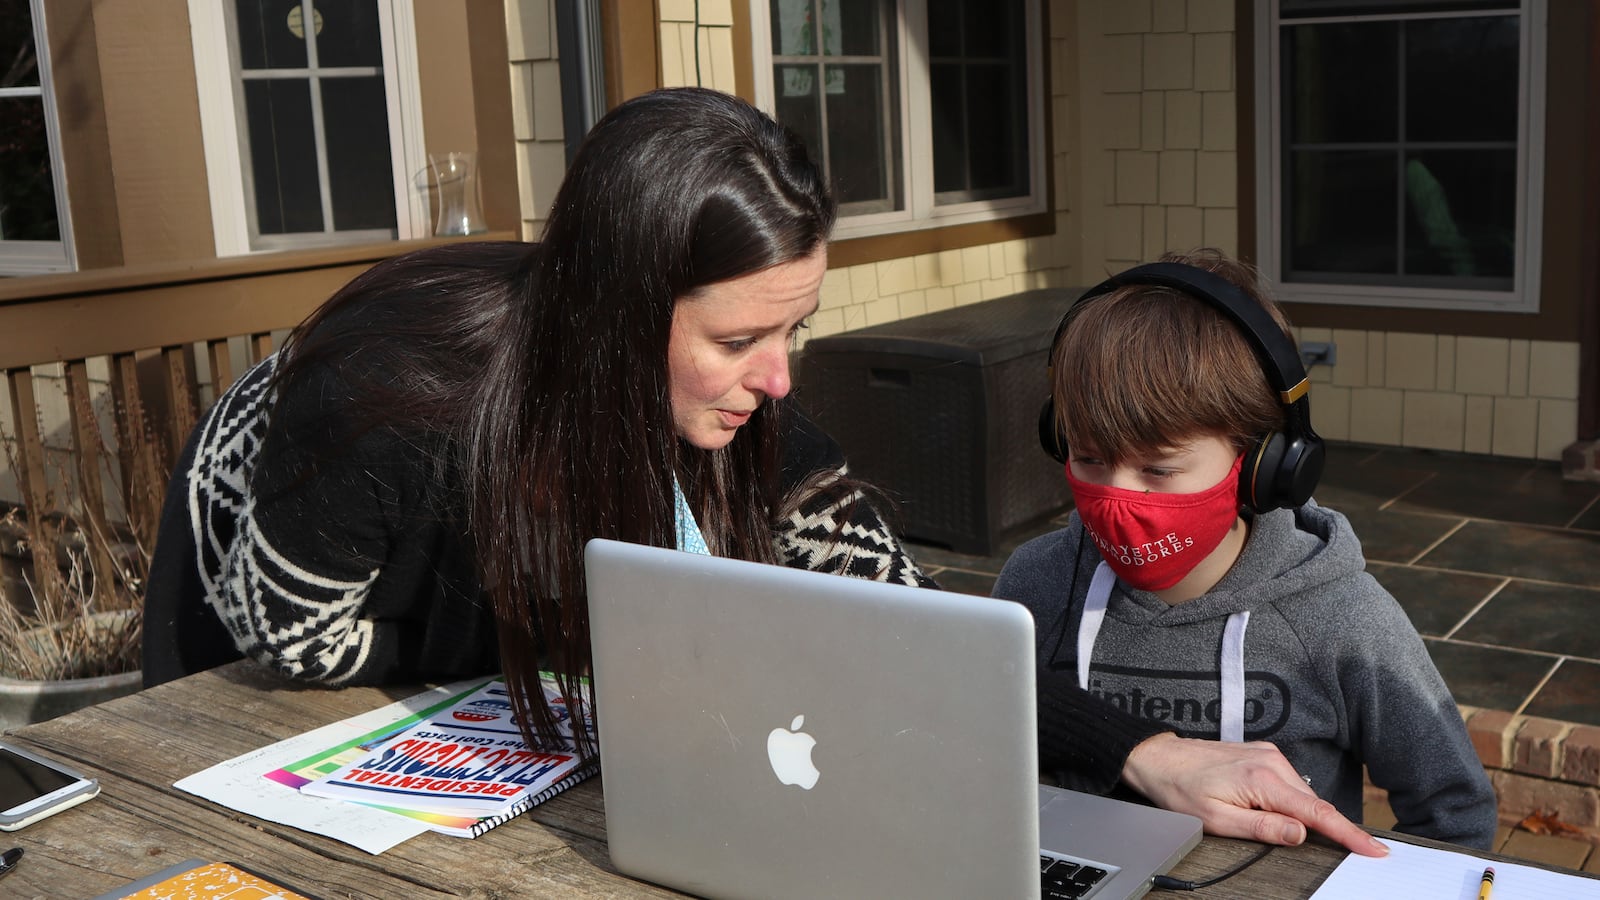 Angela Atkins helps her son Jess Atkins work on a math problem on his laptop during home schooling.